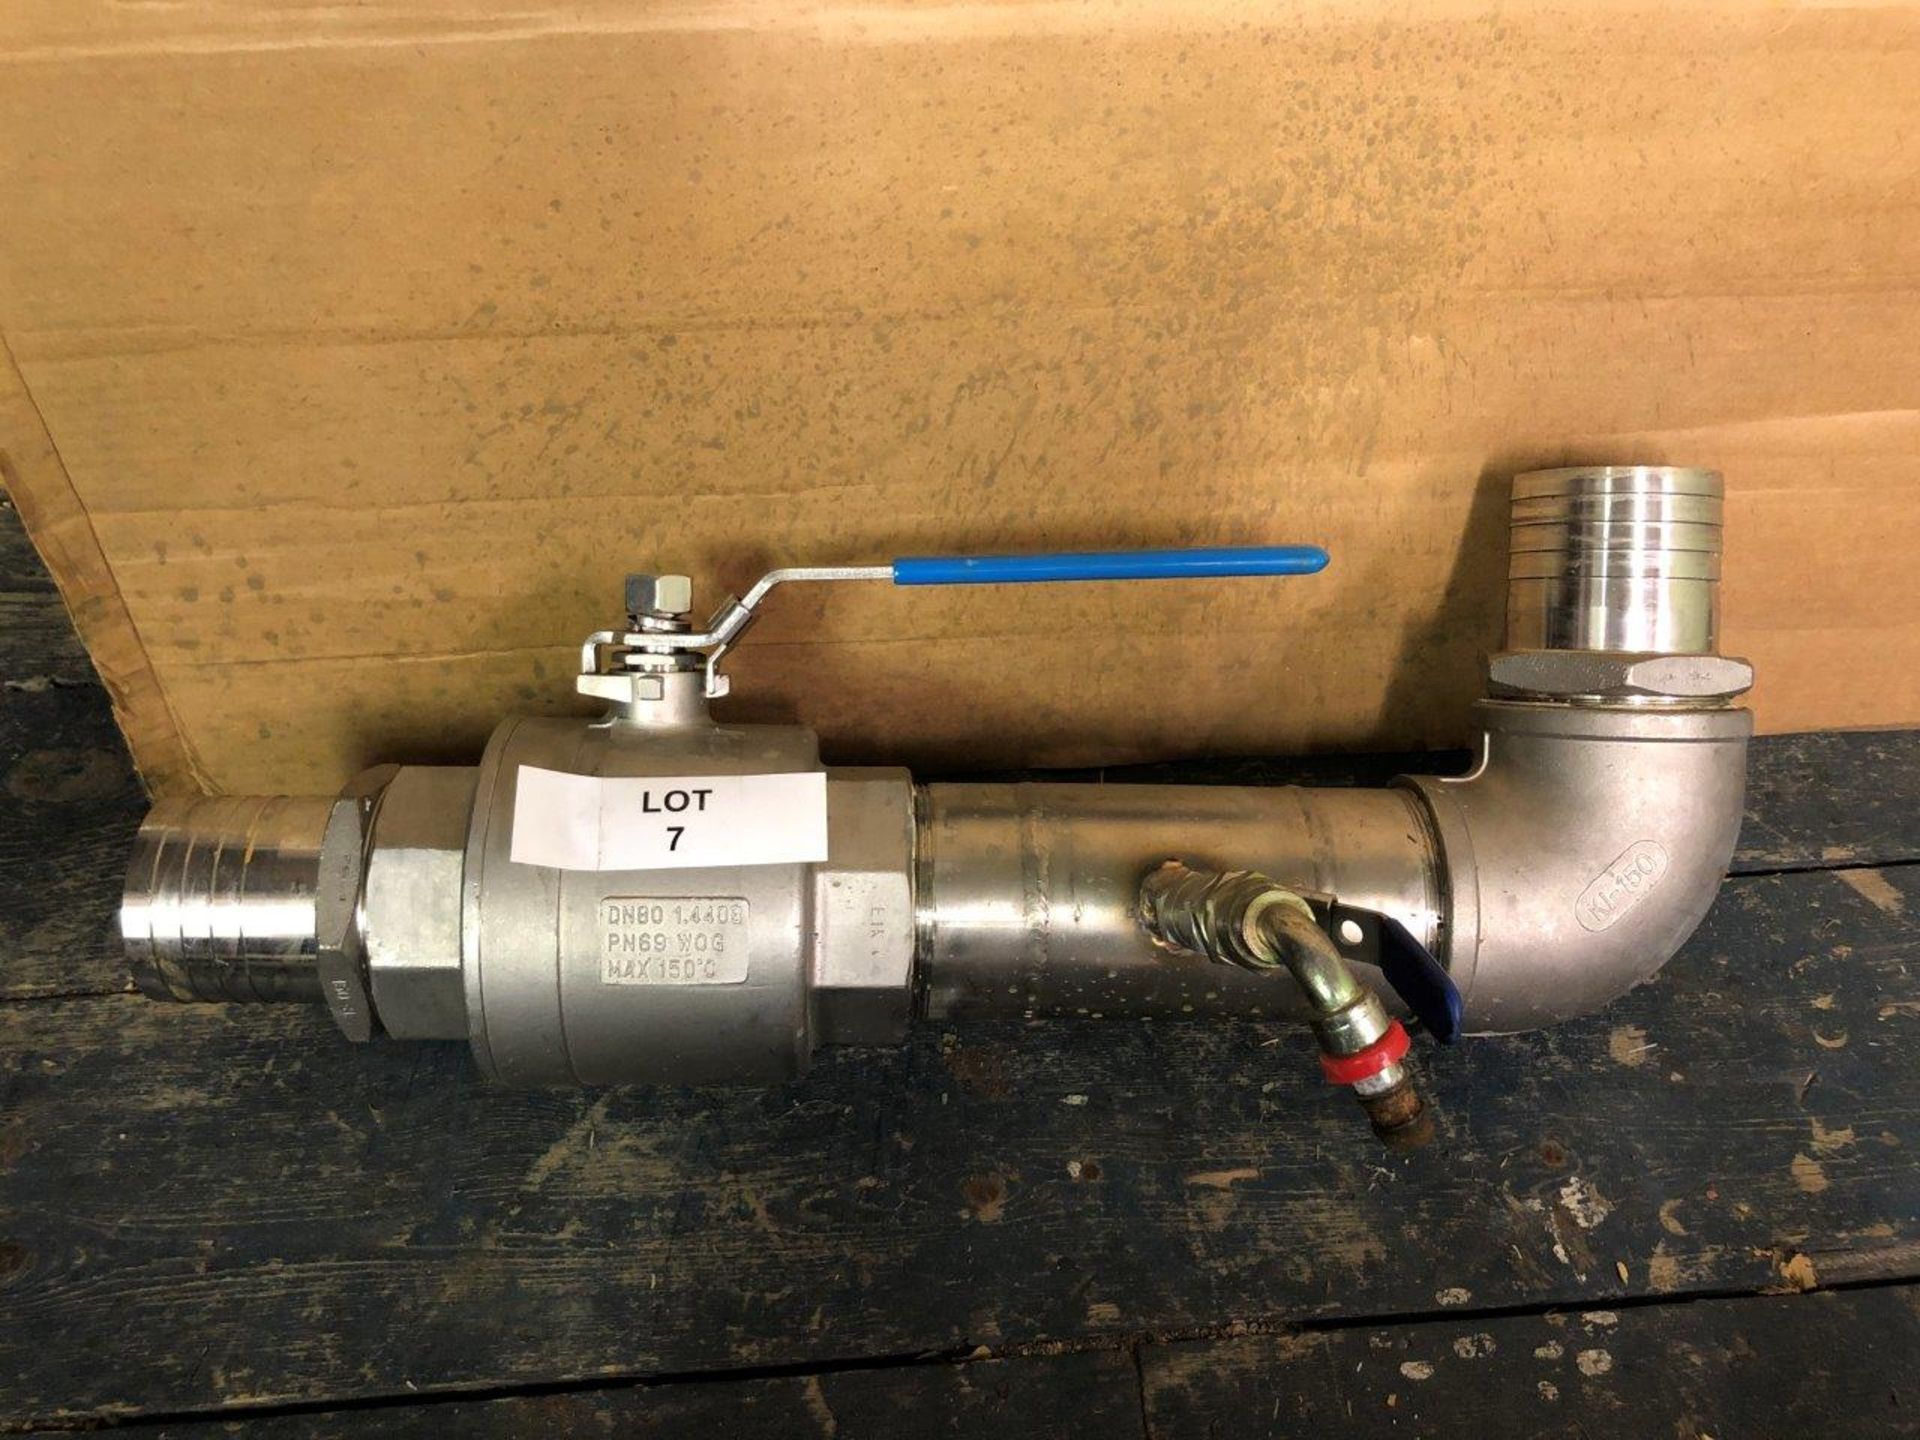 DN 89 316 stainless steel ball valve on pipework with 90° bend and 3” hose barbs